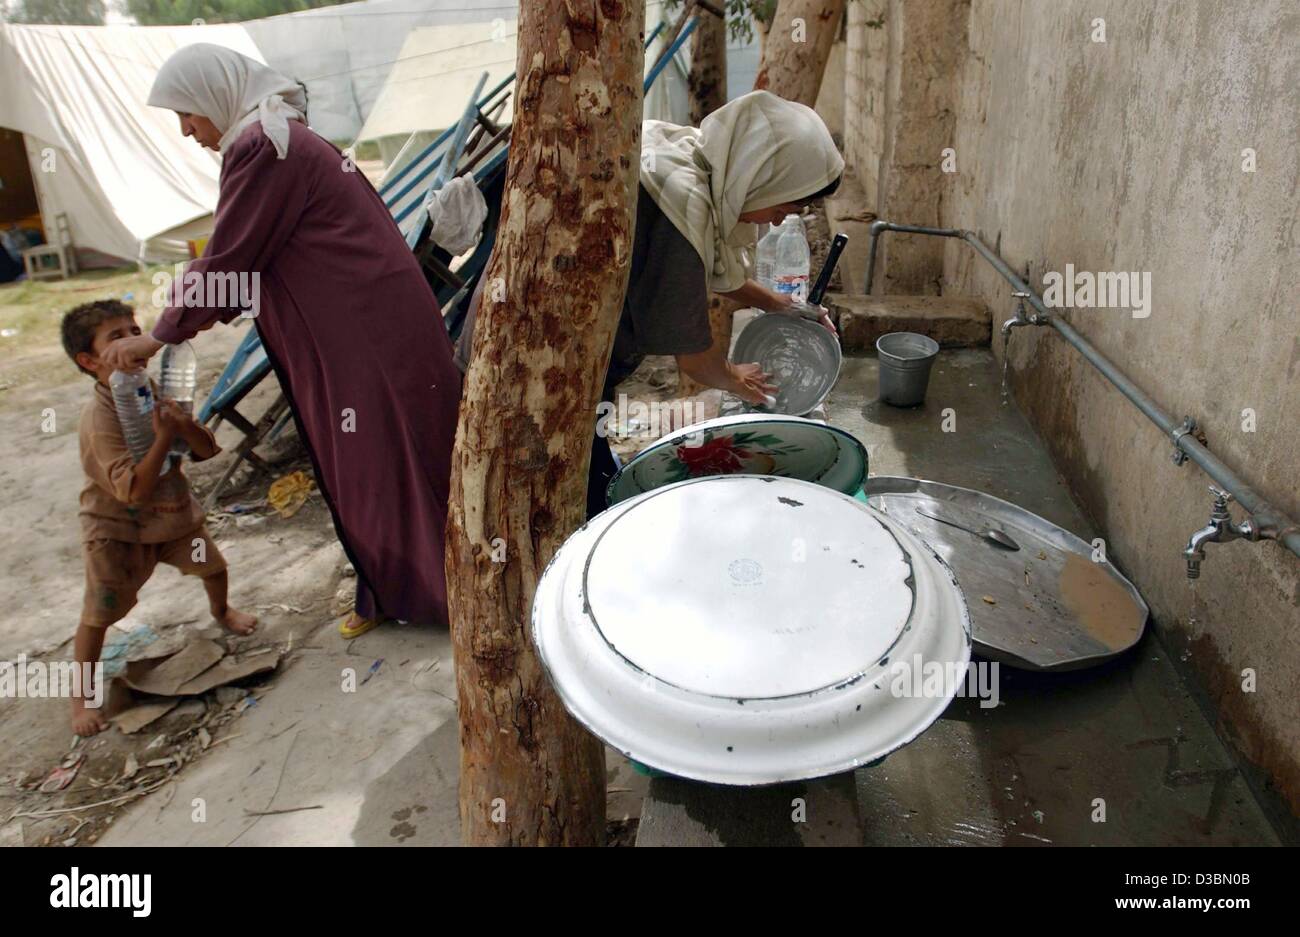 (dpa) - Palestinian women wash the dishes in a tent camp set up for families evicted from their homes, outside Baghdad, 22 May 2003. When U.S. forces seized the capital, the elite of Saddam Hussein's regime fled. Now, with no legal system left to stop them, families are flooding the buildings that w Stock Photo